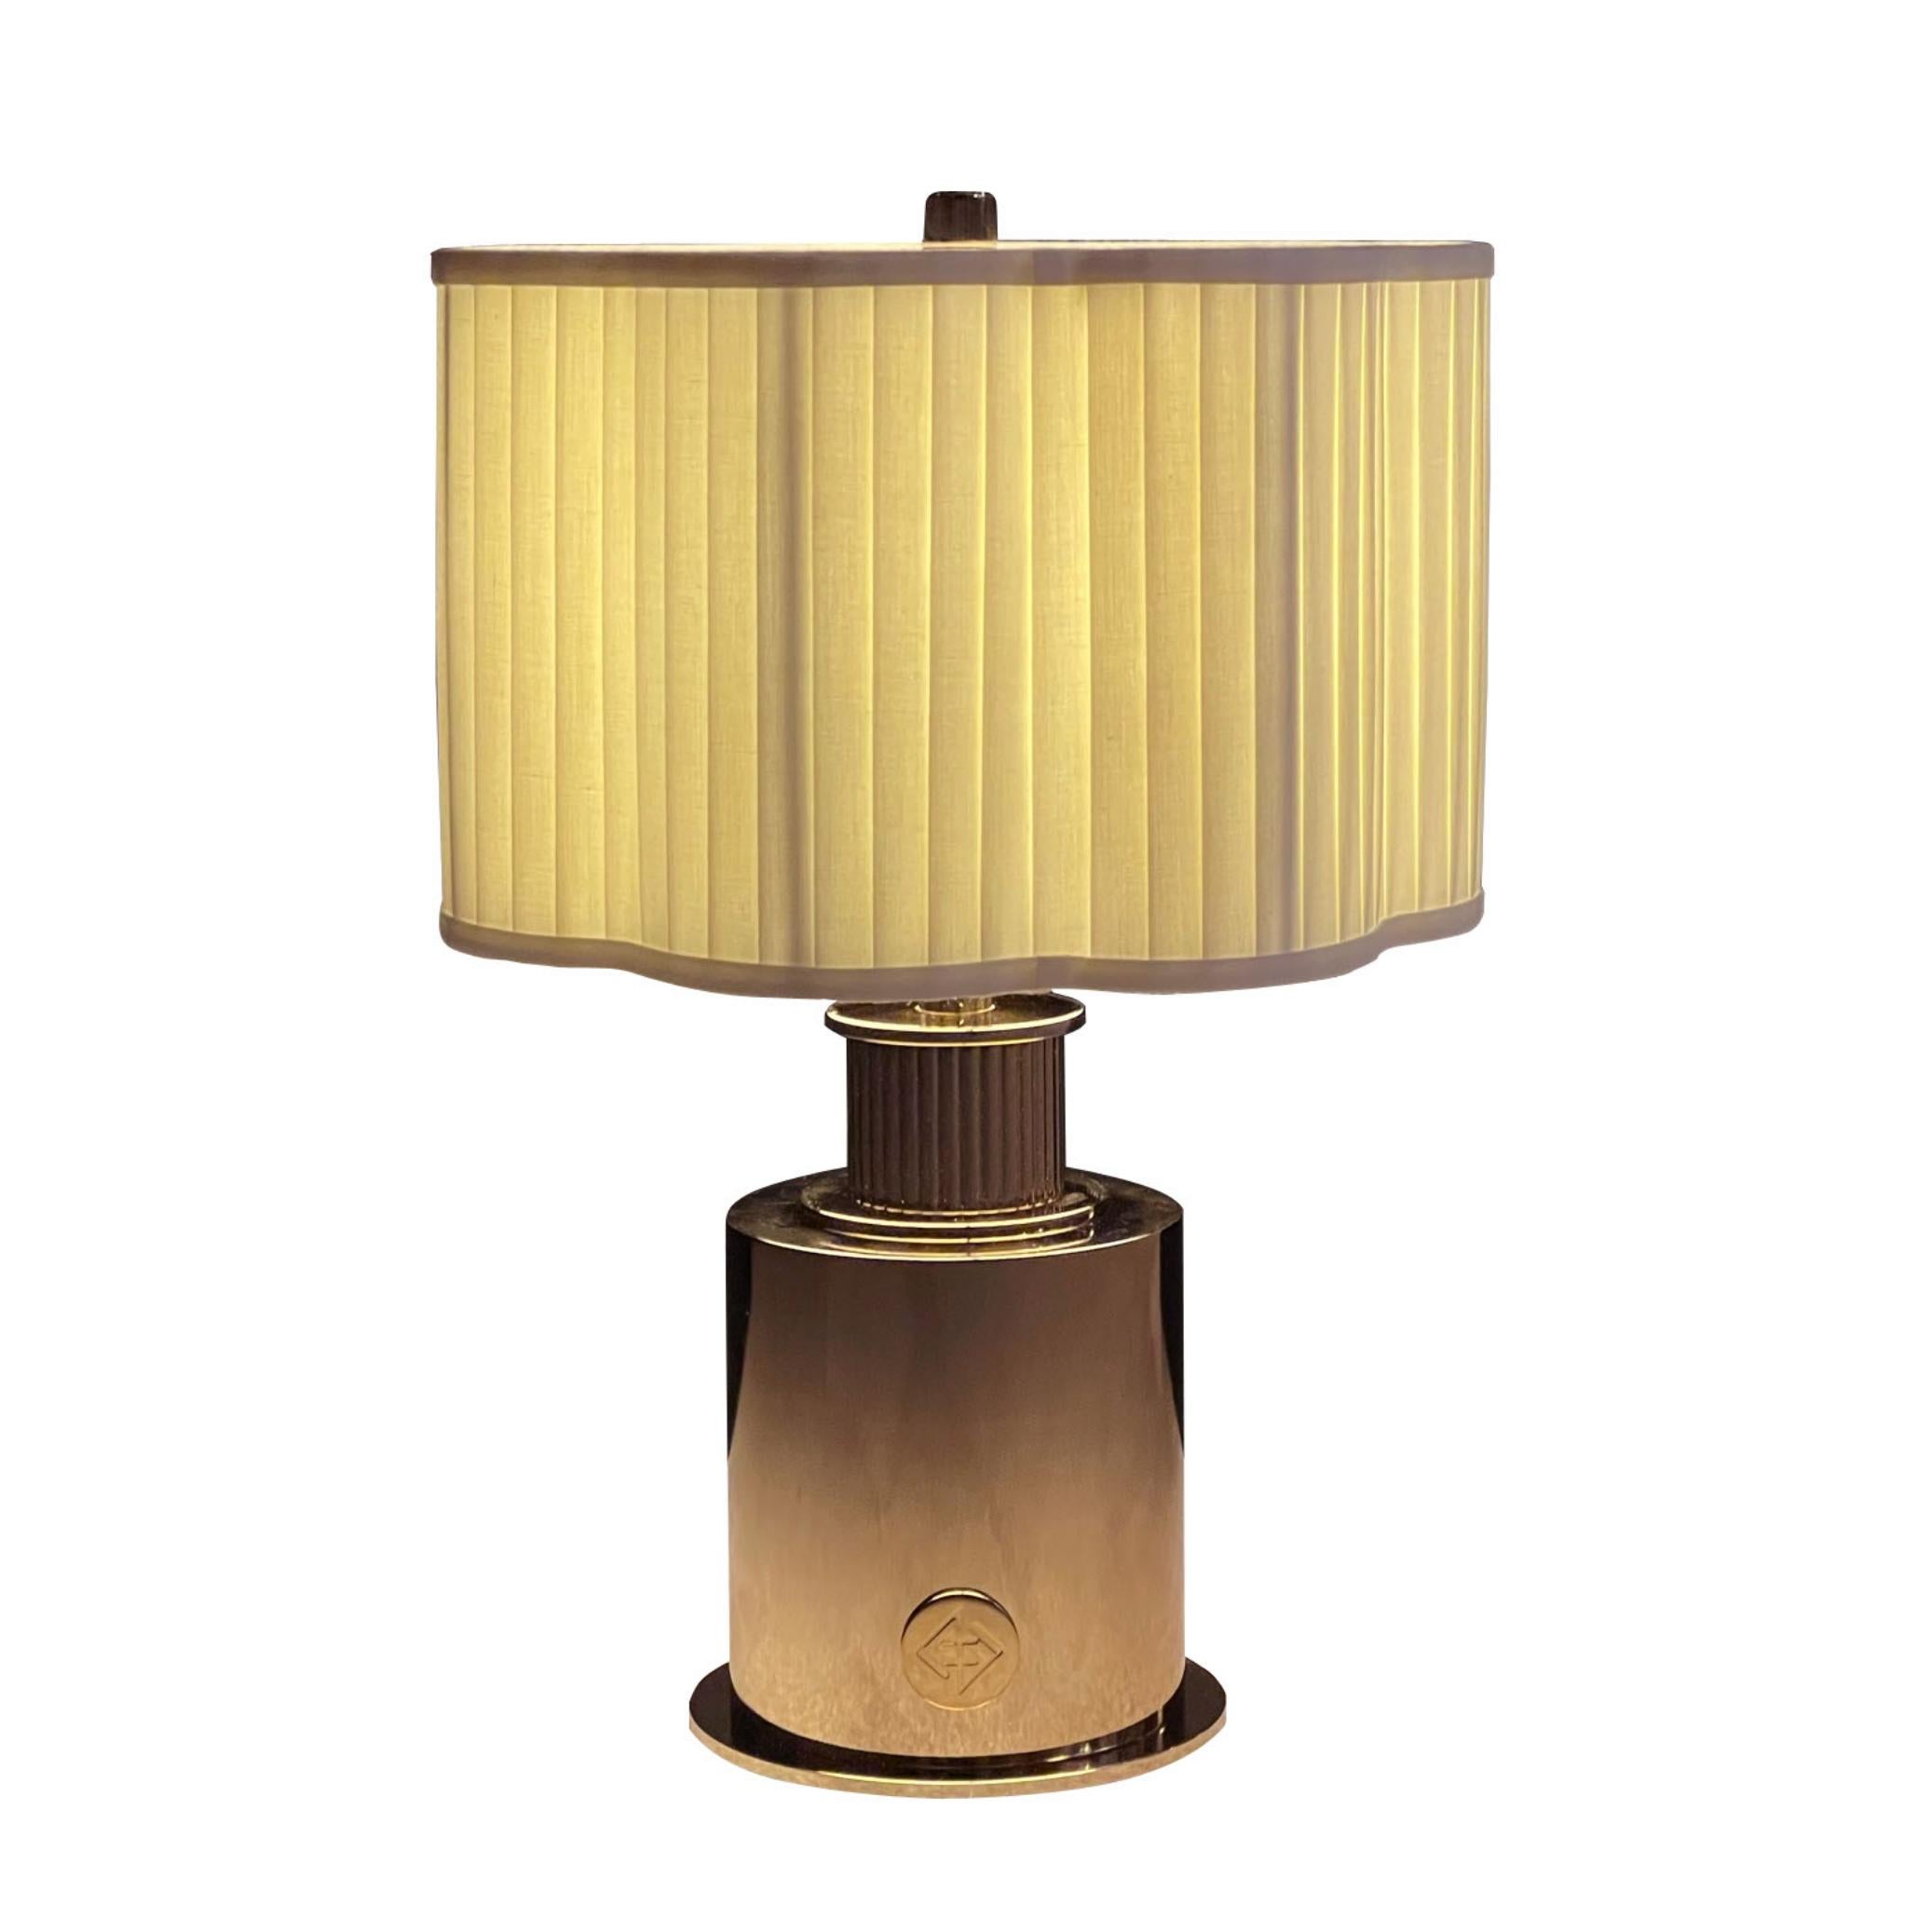 inspired by the poetic silhouette of the ivory camellia flower, this medium scale portable lamp is quietly elegant. it is suitable to provide an ambient glow to your home

Description: portable USB table lamp LED, rechargeable
Color: crystal and